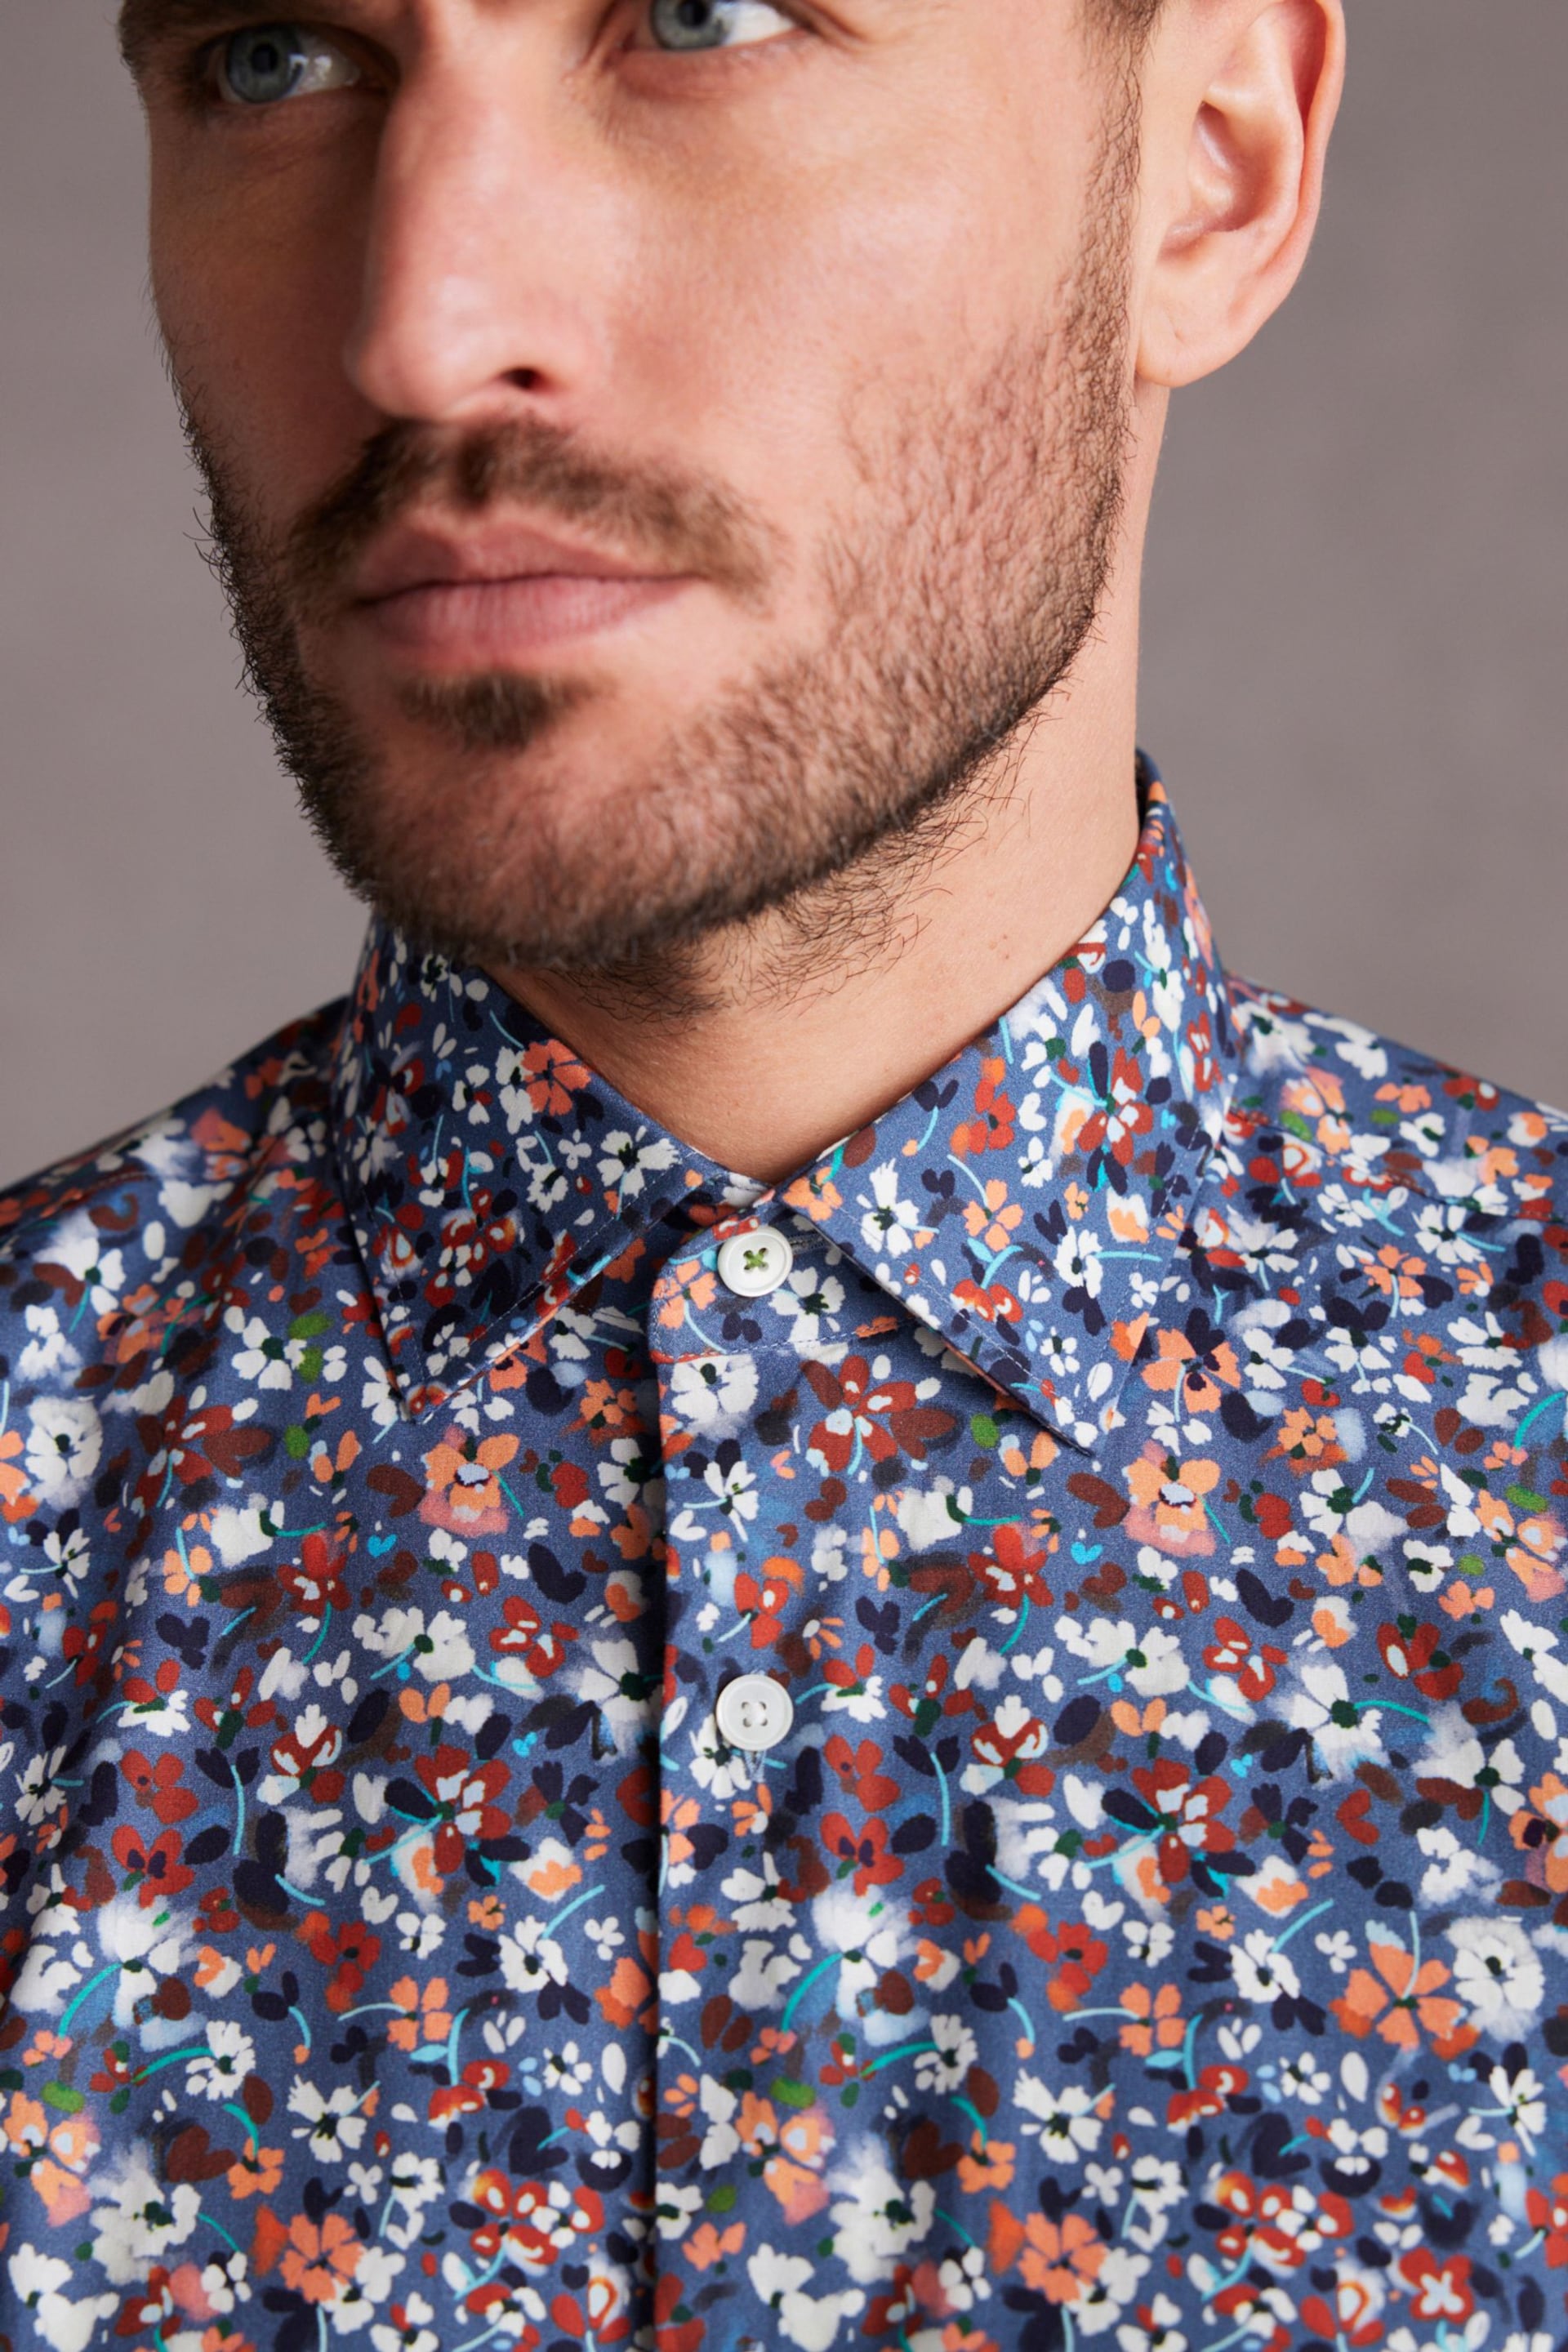 Blue Floral Signature Made With Italian Fabric Printed Short Sleeve Shirt - Image 4 of 7